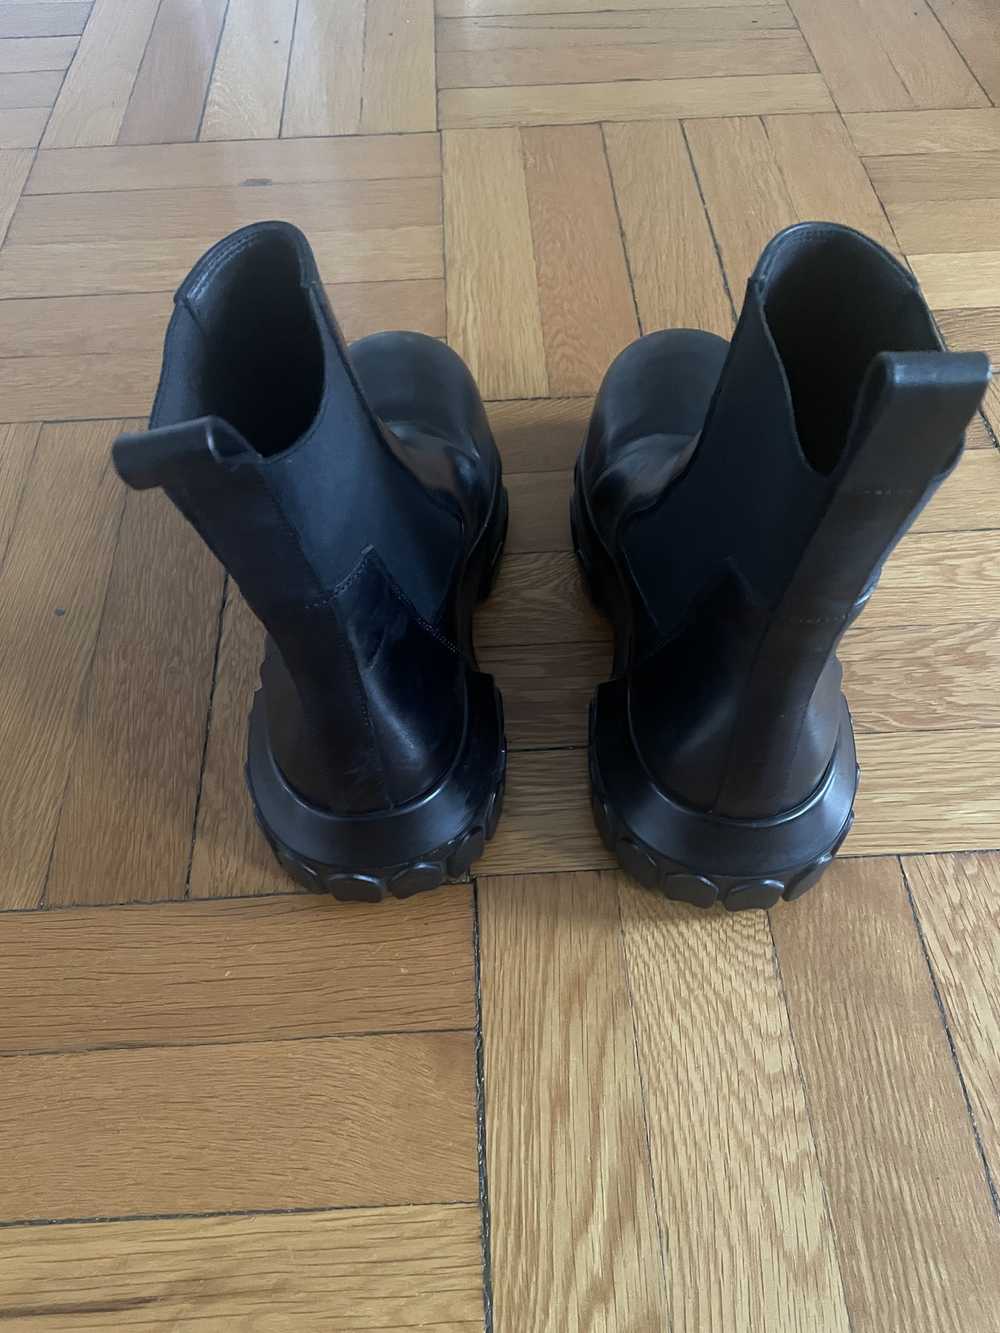 Rick Owens Beatle Bozo Tractor Boots - image 2